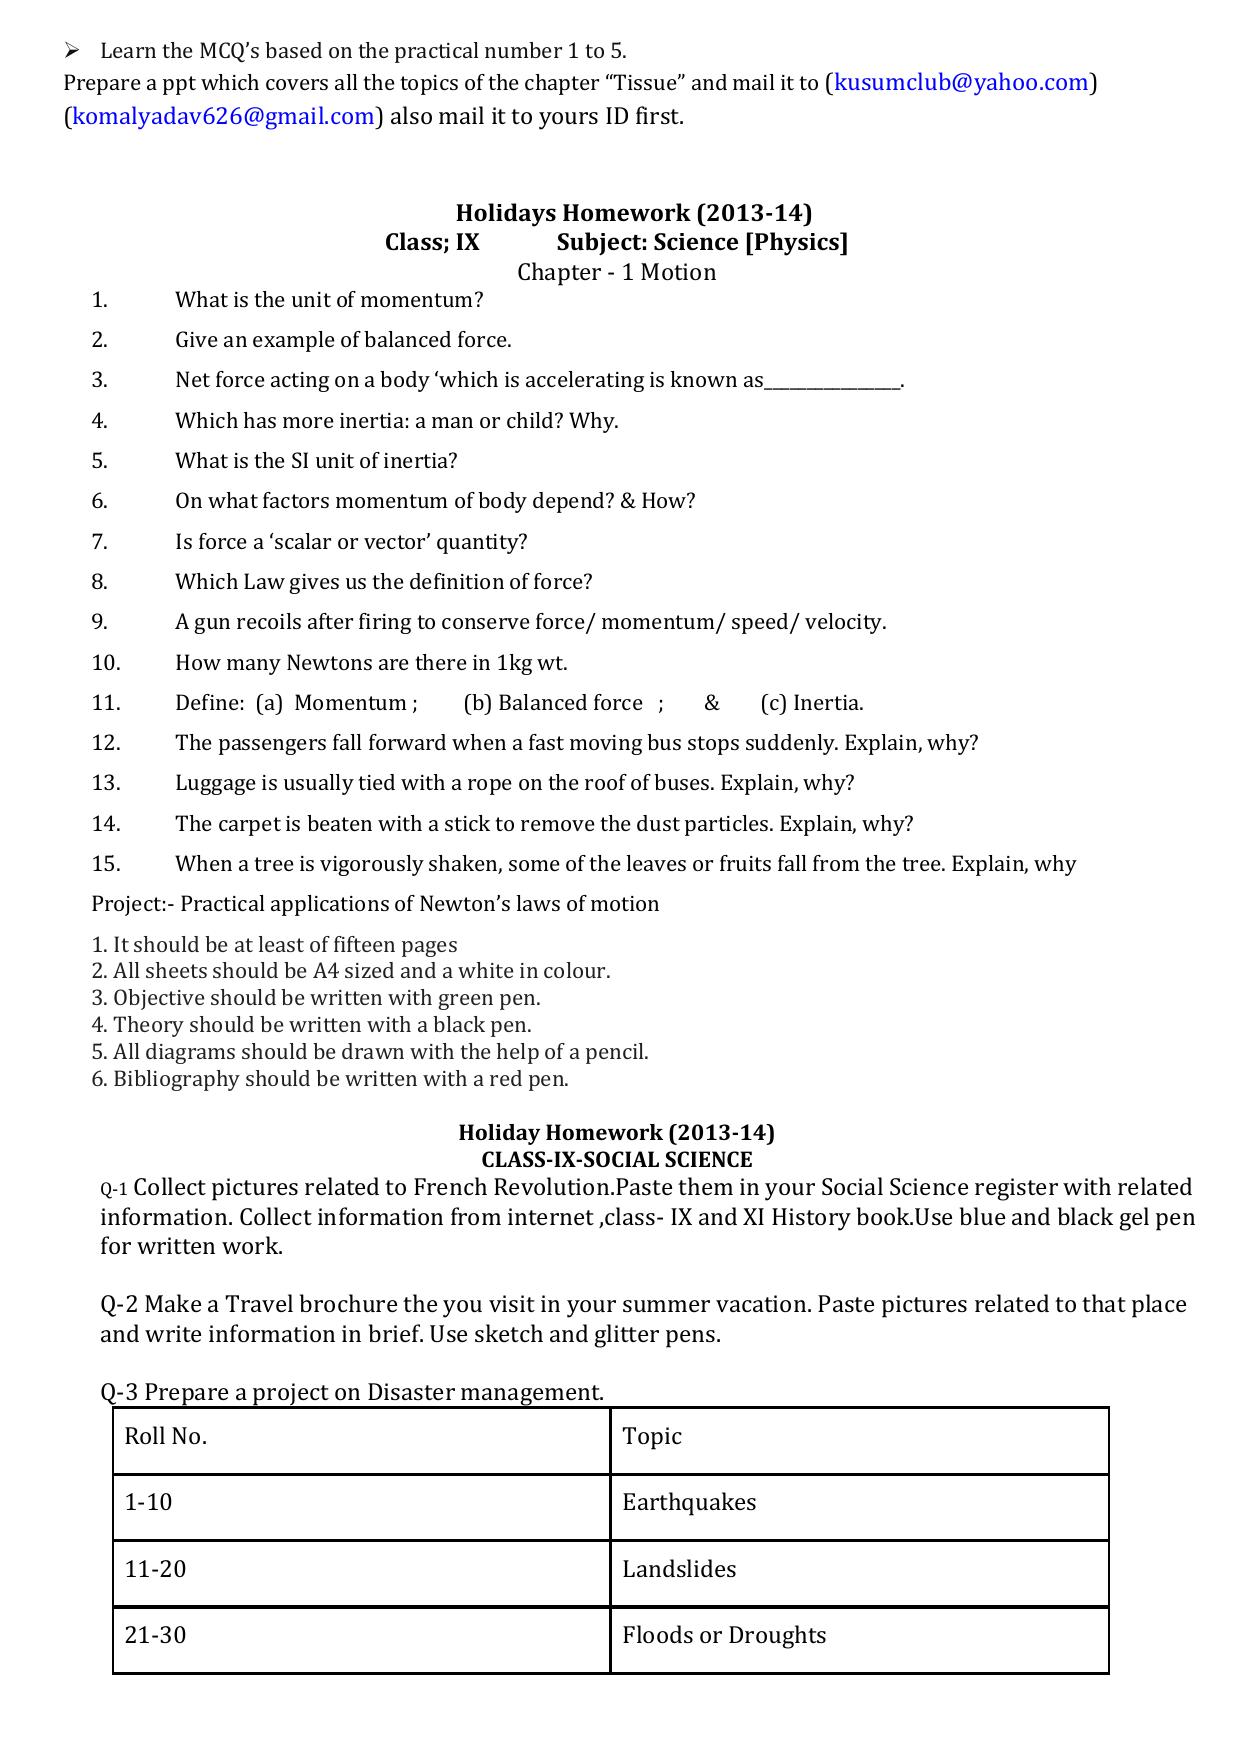 CBSE Worksheets for Class 9 Assignment 3 - Page 5